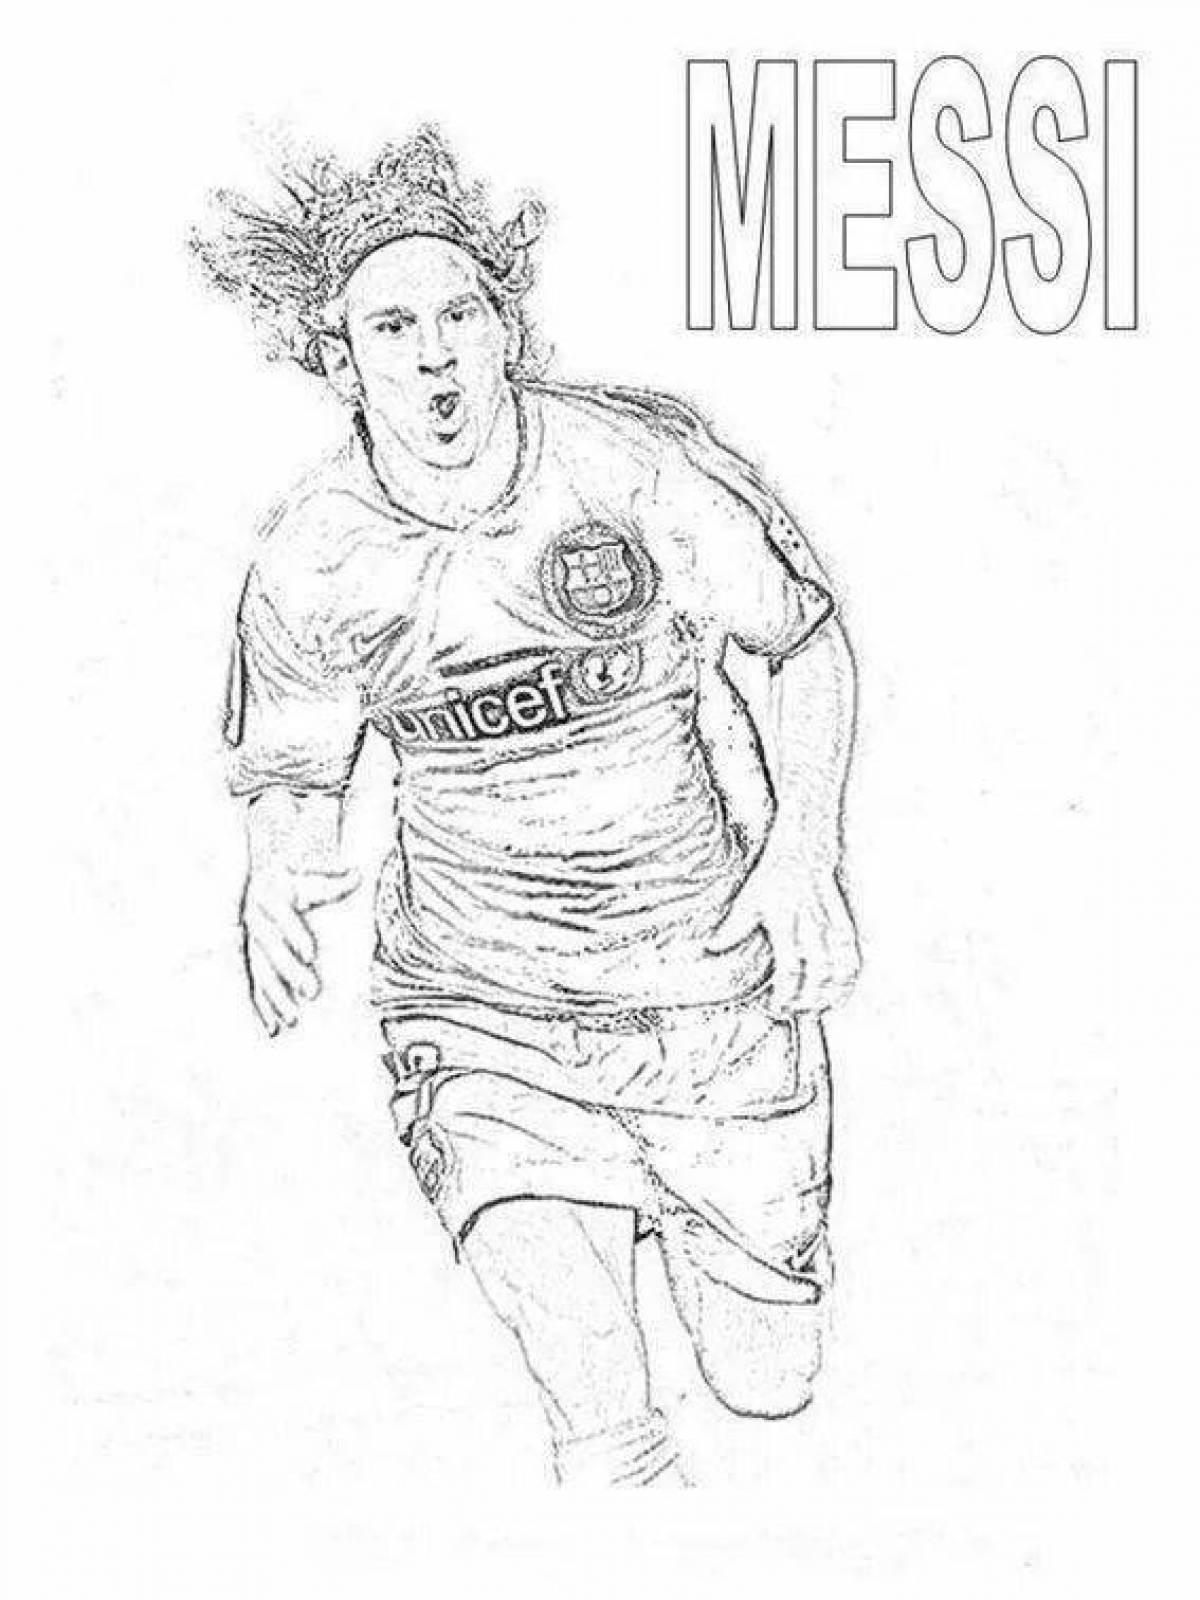 Coloring page energetic lionel messi